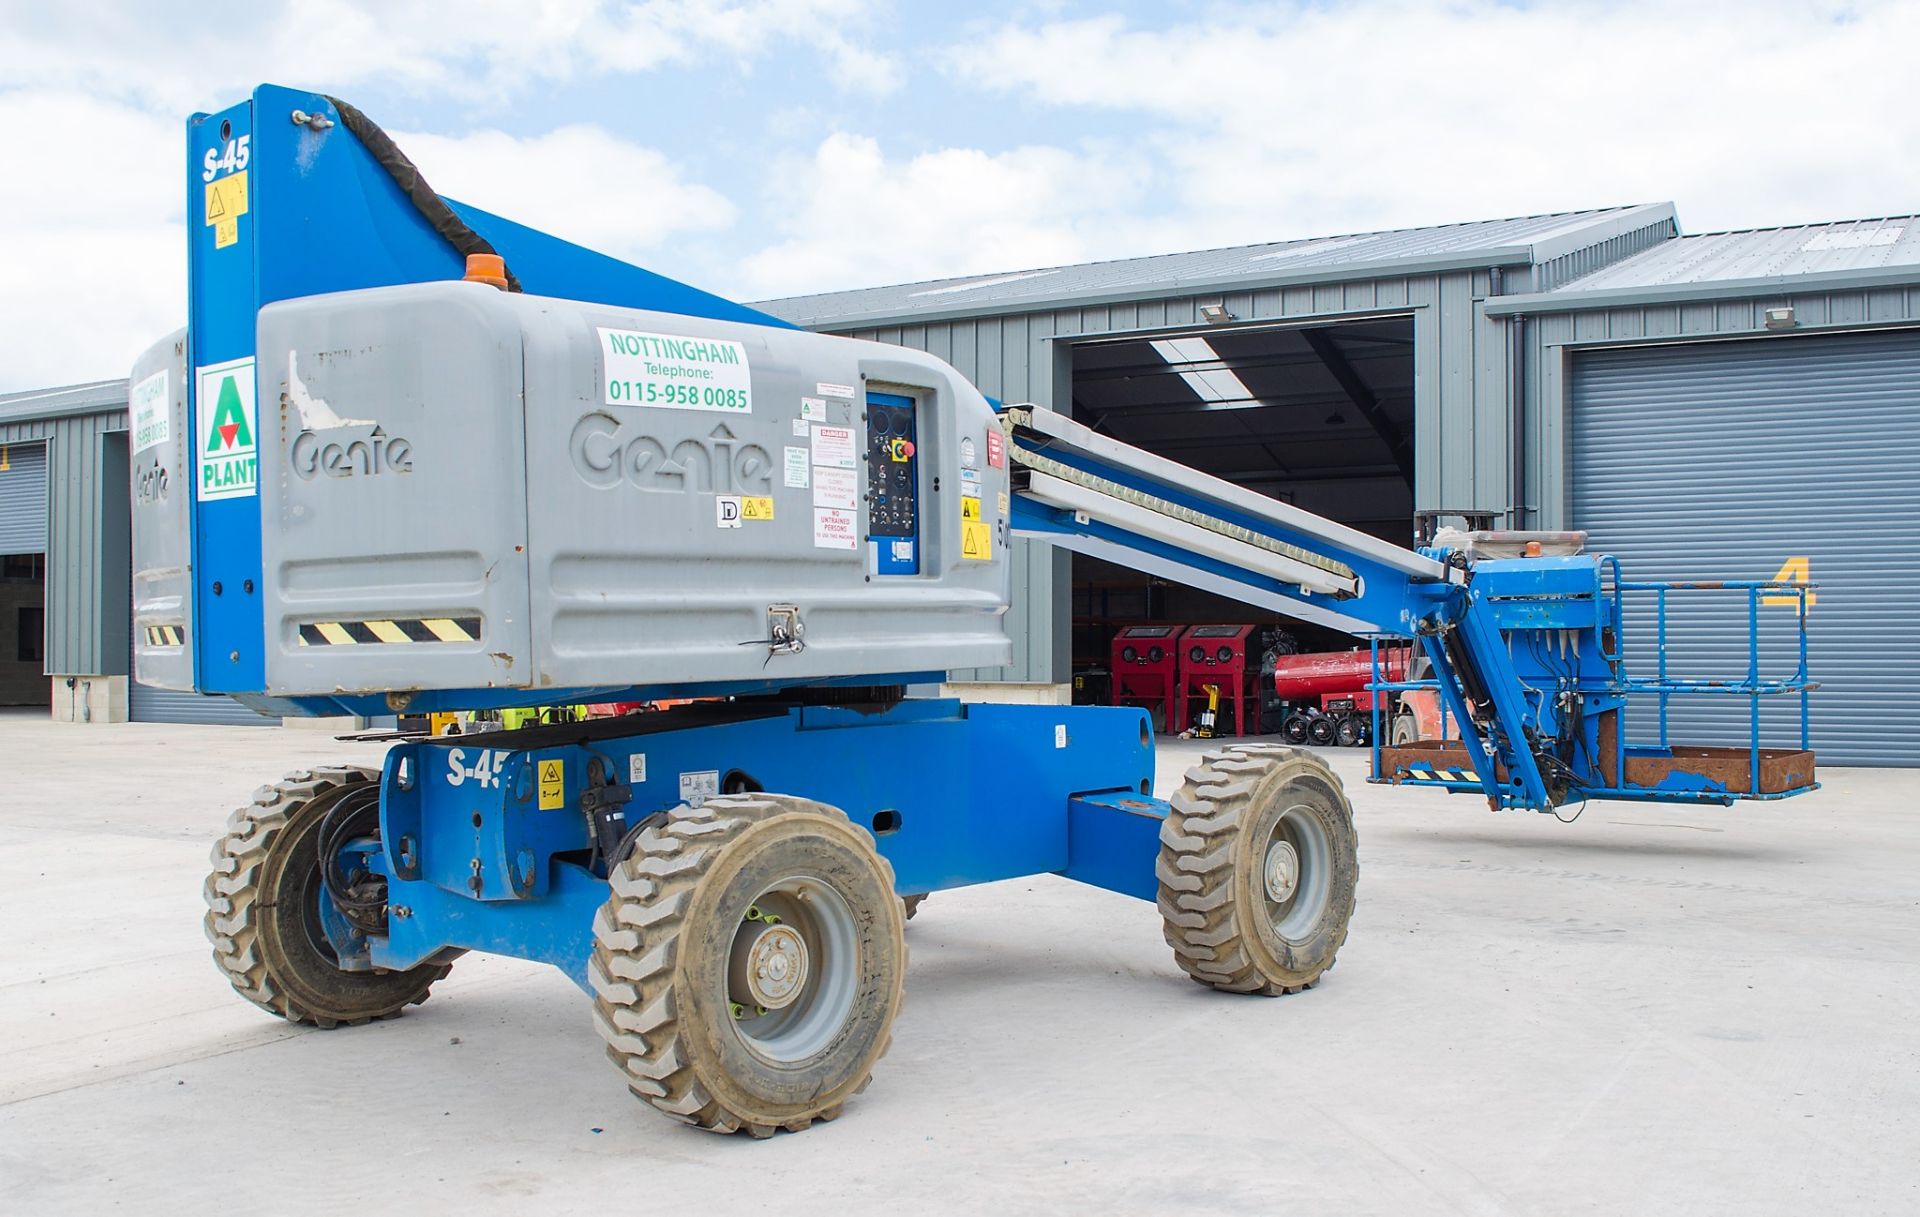 Genie S-45 diesel driven 45 ft boom lift access platform Year: 2014 S/N: 54514-18197 Recorded Hours: - Image 3 of 18